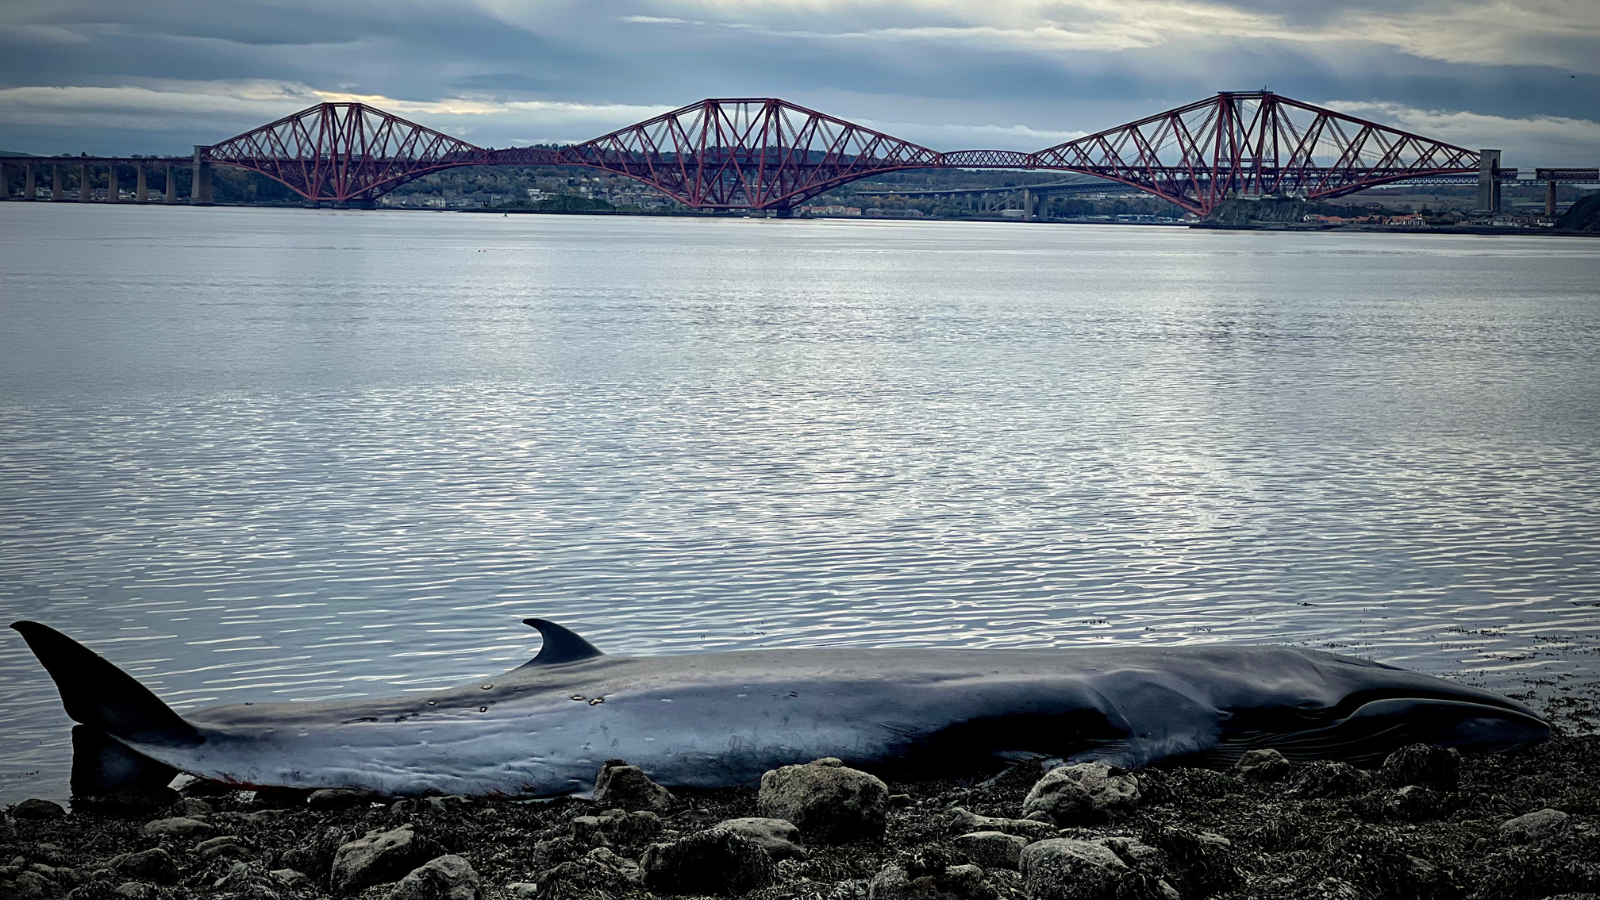 The 40-foot Sei Whale washed up in North Queensferry in November last year. (Image Channel 4/STV Studios)